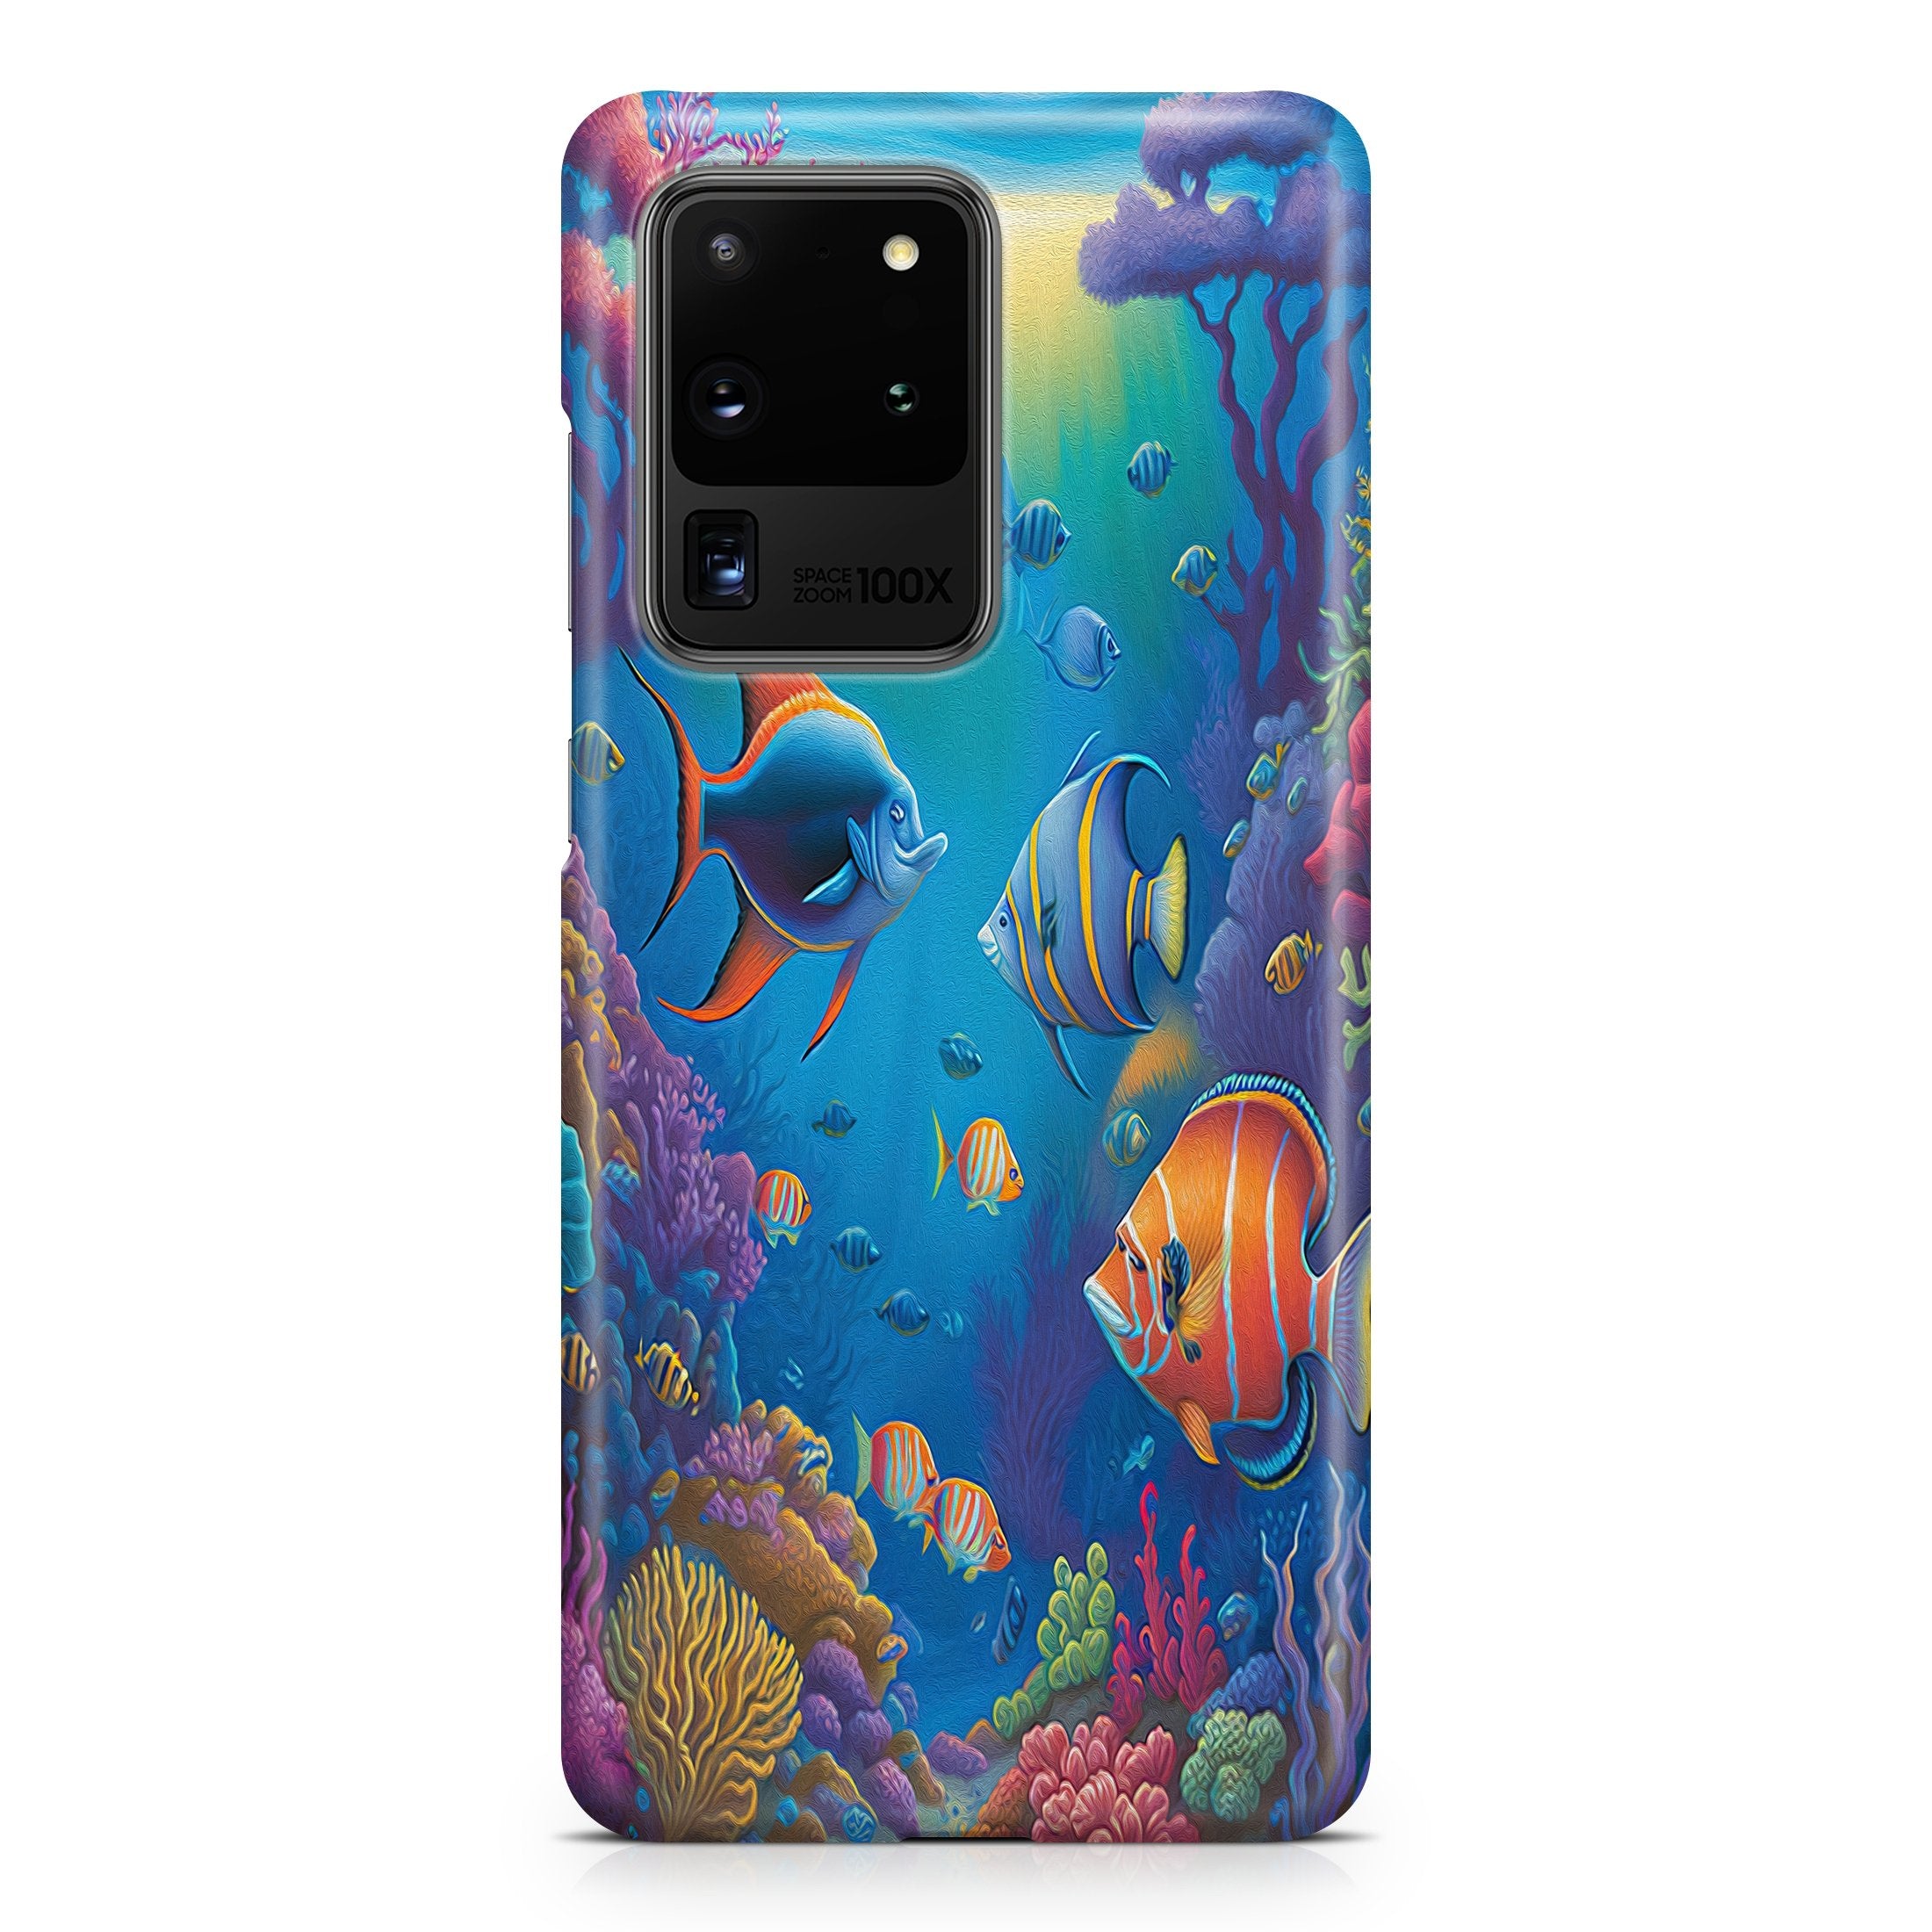 Heavenly Coral - Samsung phone case designs by CaseSwagger